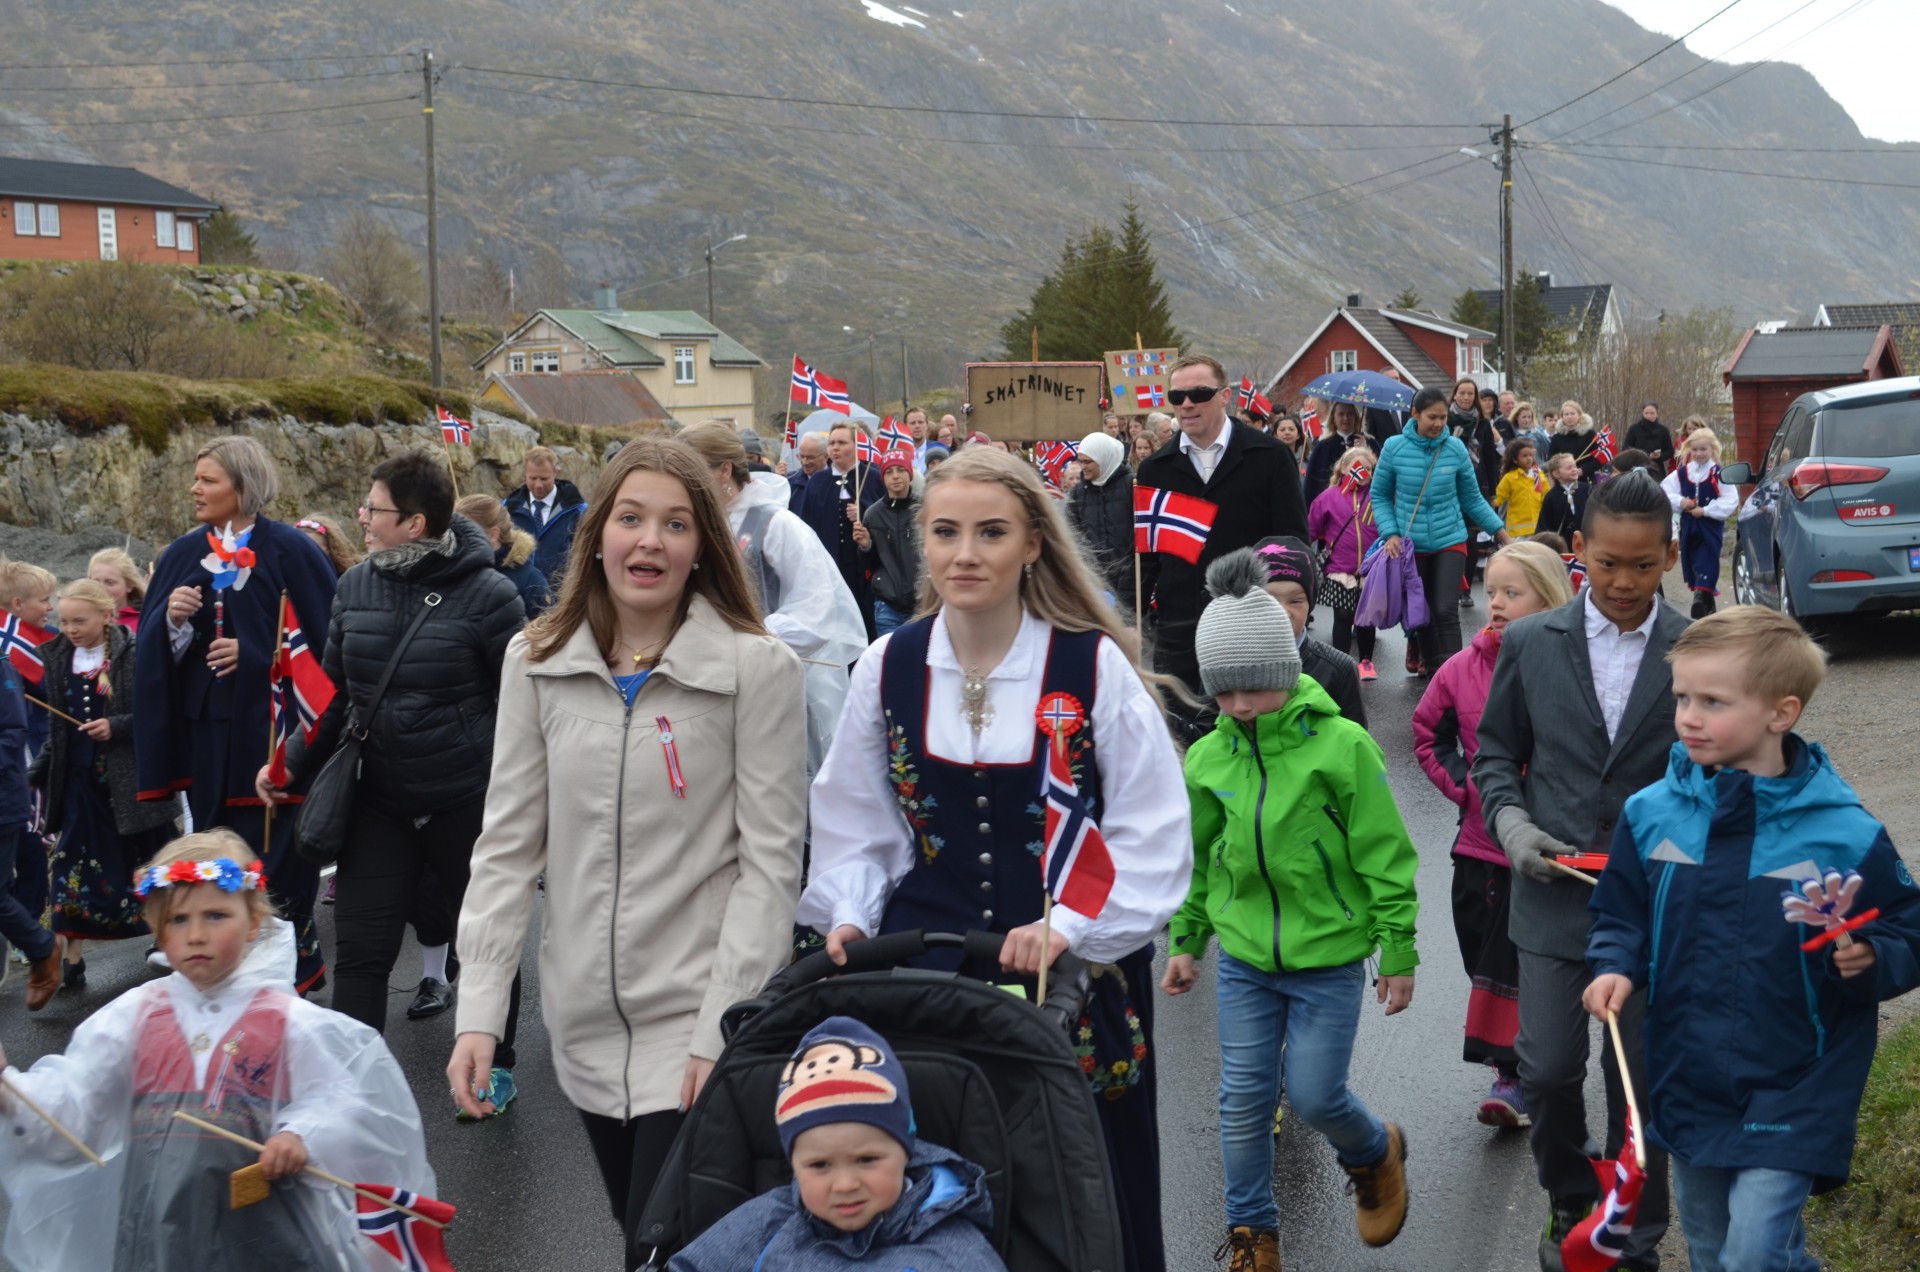 The Vikings never left the islands; their descendants march in the May 17 parade in the village of Sorvage, to commemorate Norway's independence. But people have also welcomed new arrivals from Asia and the Mideast, whose faces are increasingly seen here.